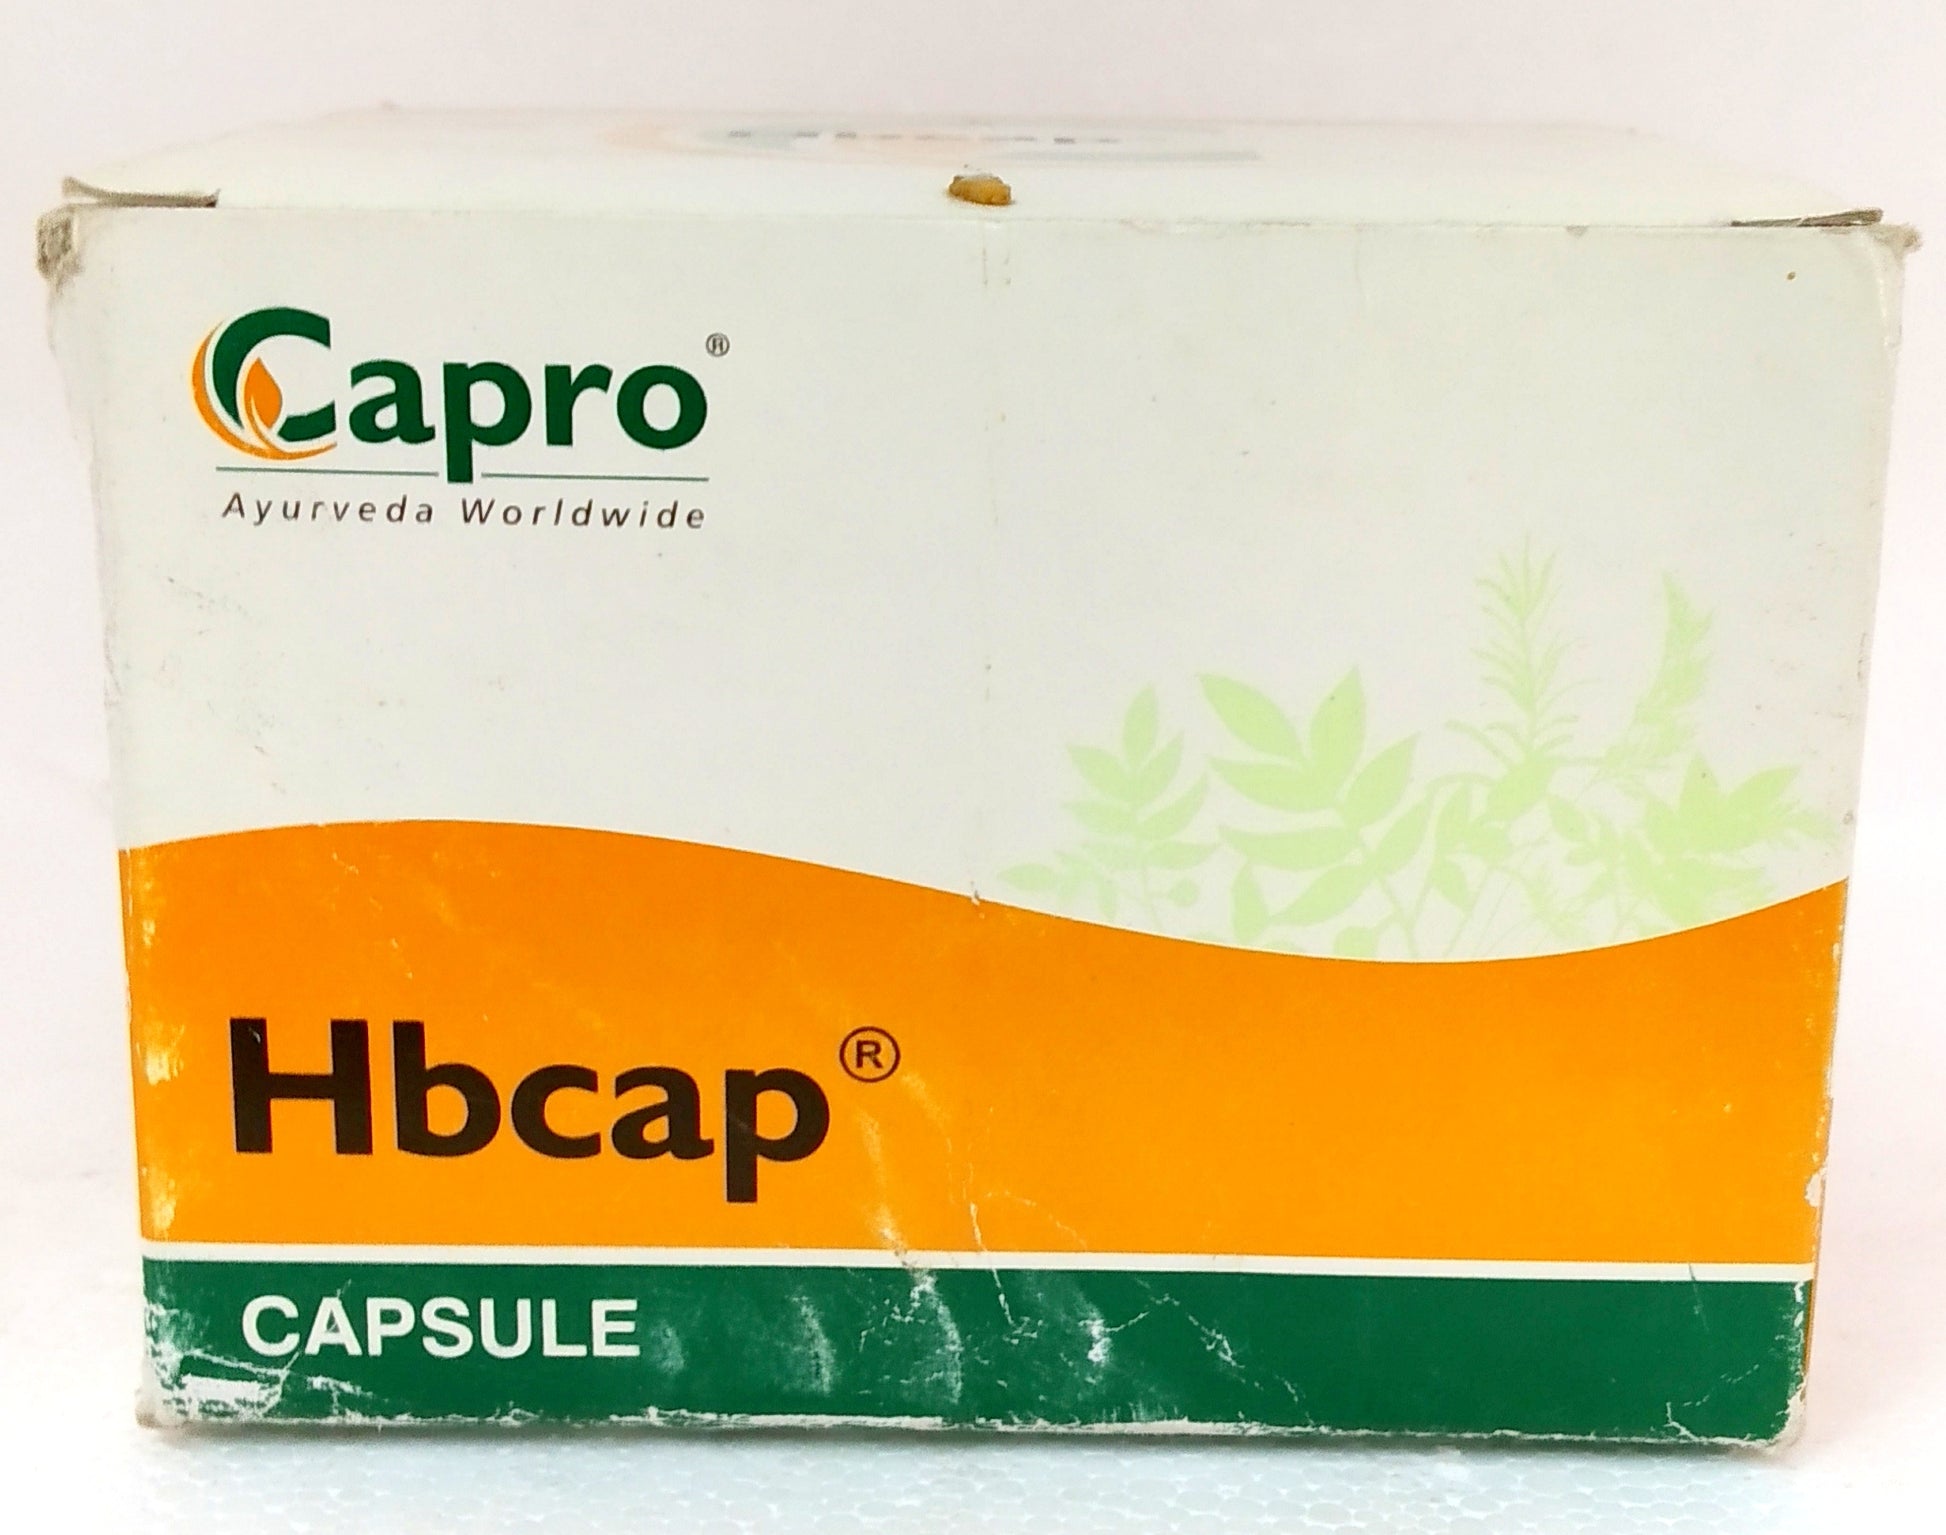 Shop Hbcap 10Capsules at price 45.00 from Capro Online - Ayush Care